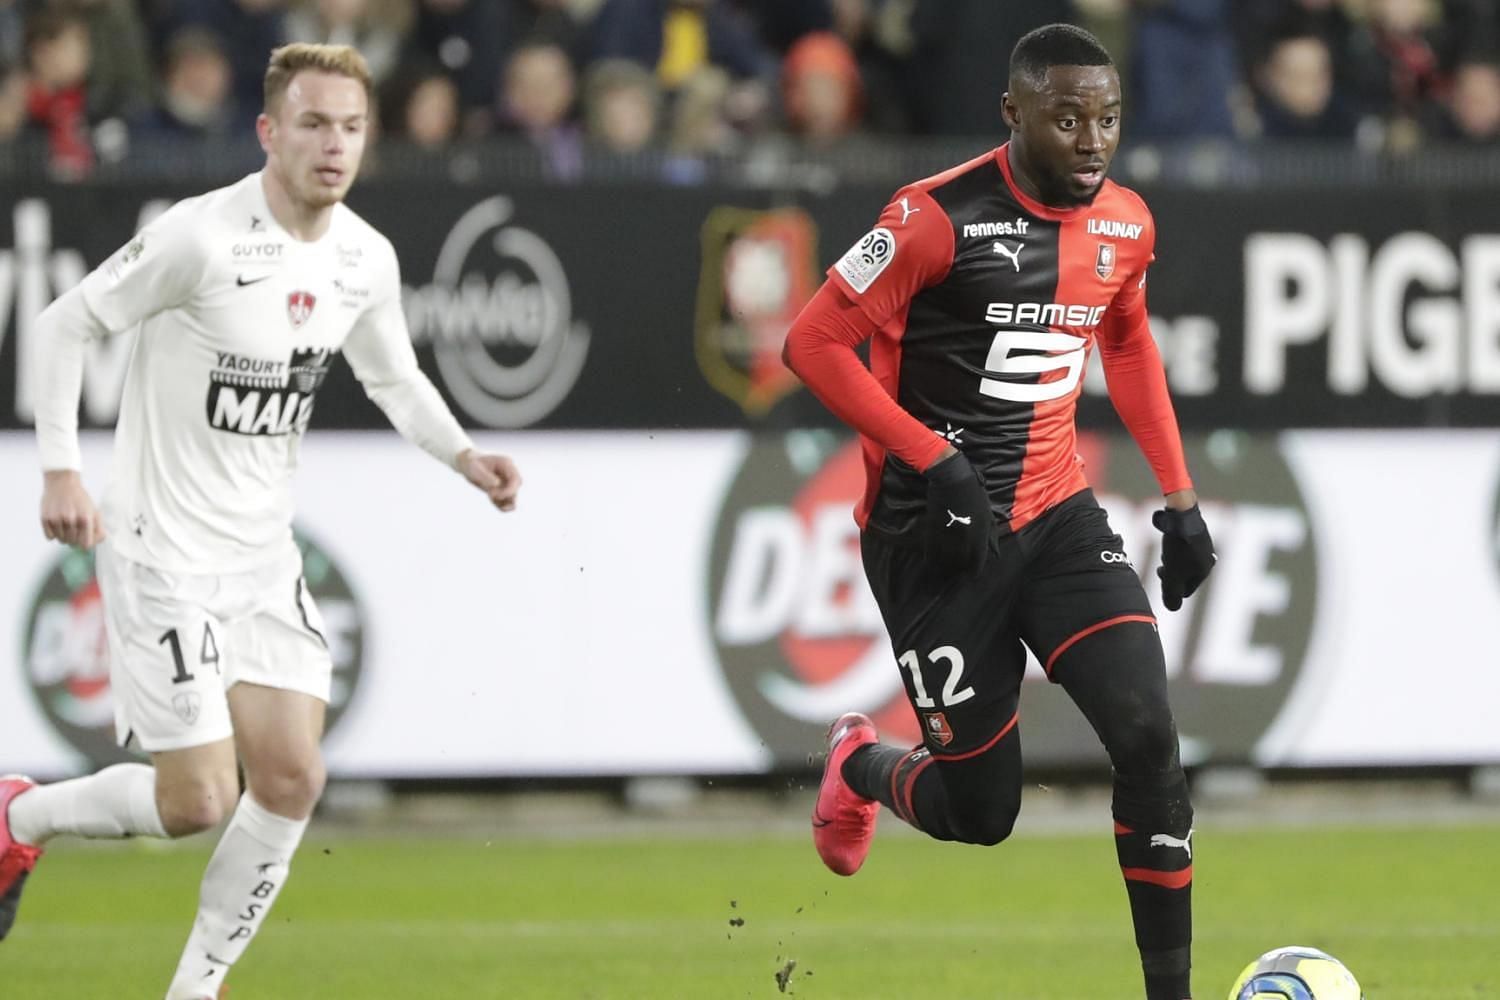 Brest and Rennes lock horns in their final game of the Ligue 1 campaign on Saturday